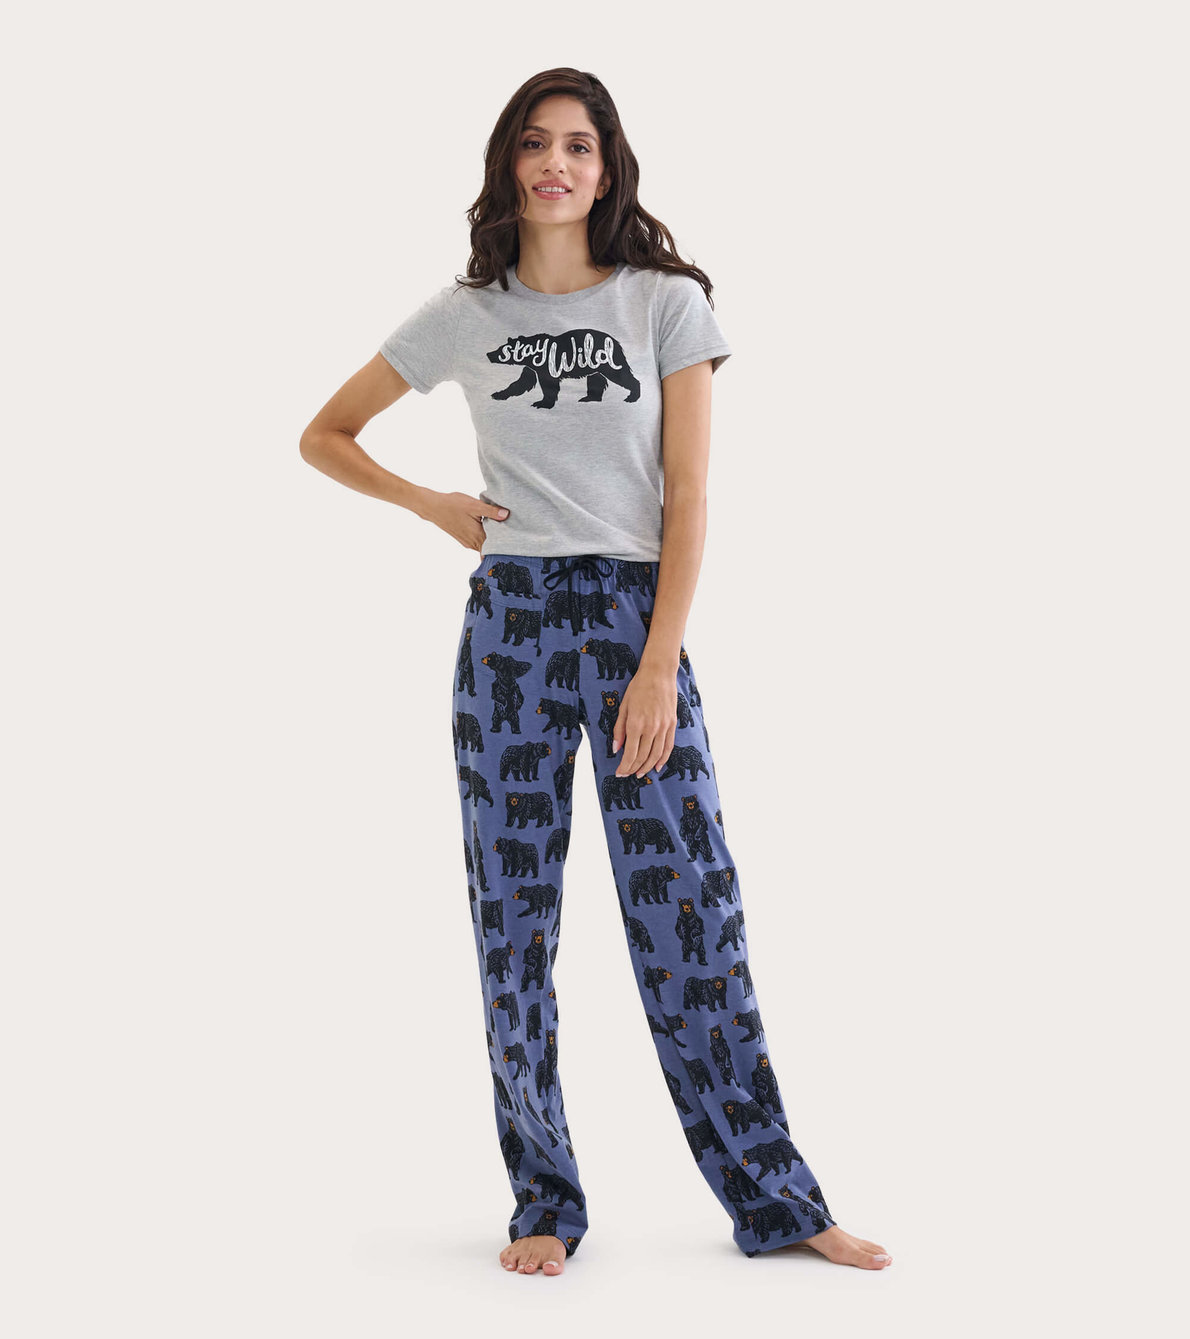 View larger image of Stay Wild Women's Tee and Pants Pajama Separates